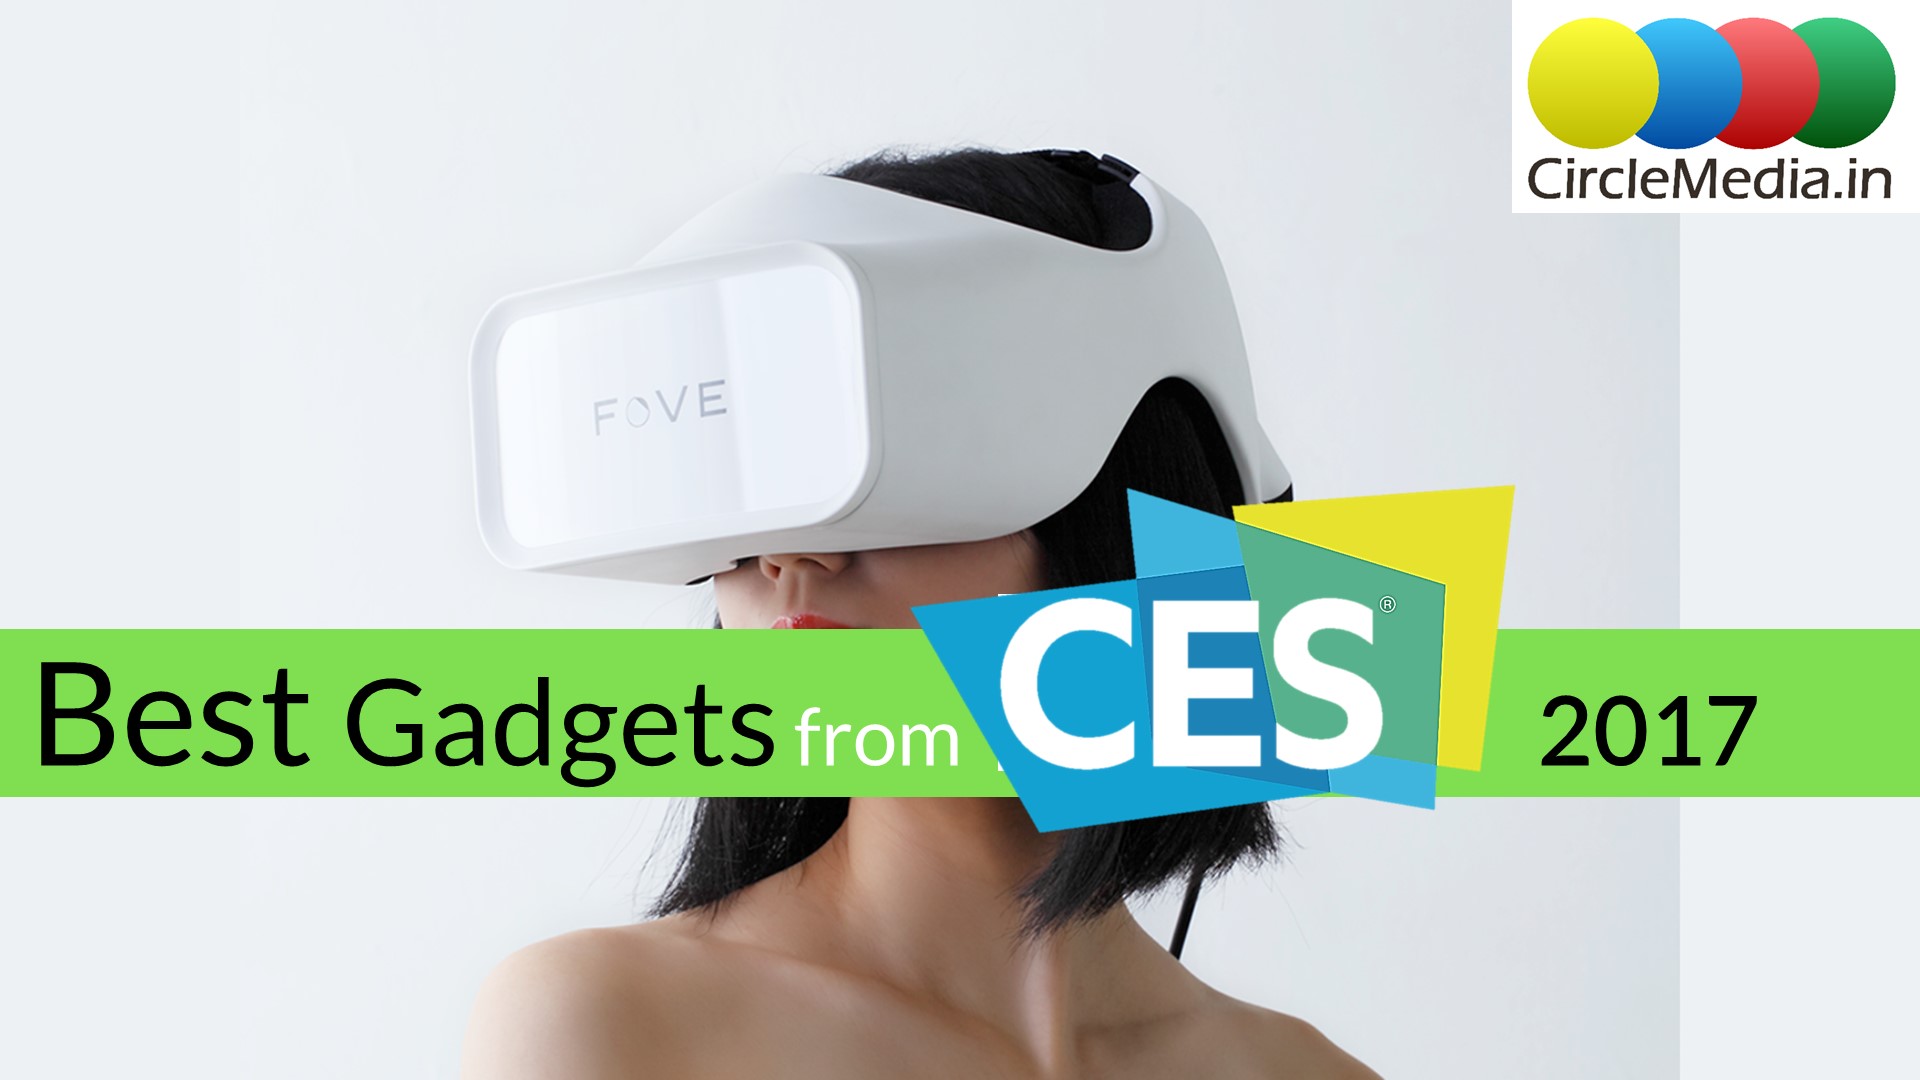 Best Gadgets from CES 2017 | most interesting gadgets from CES | CircleMedia.in